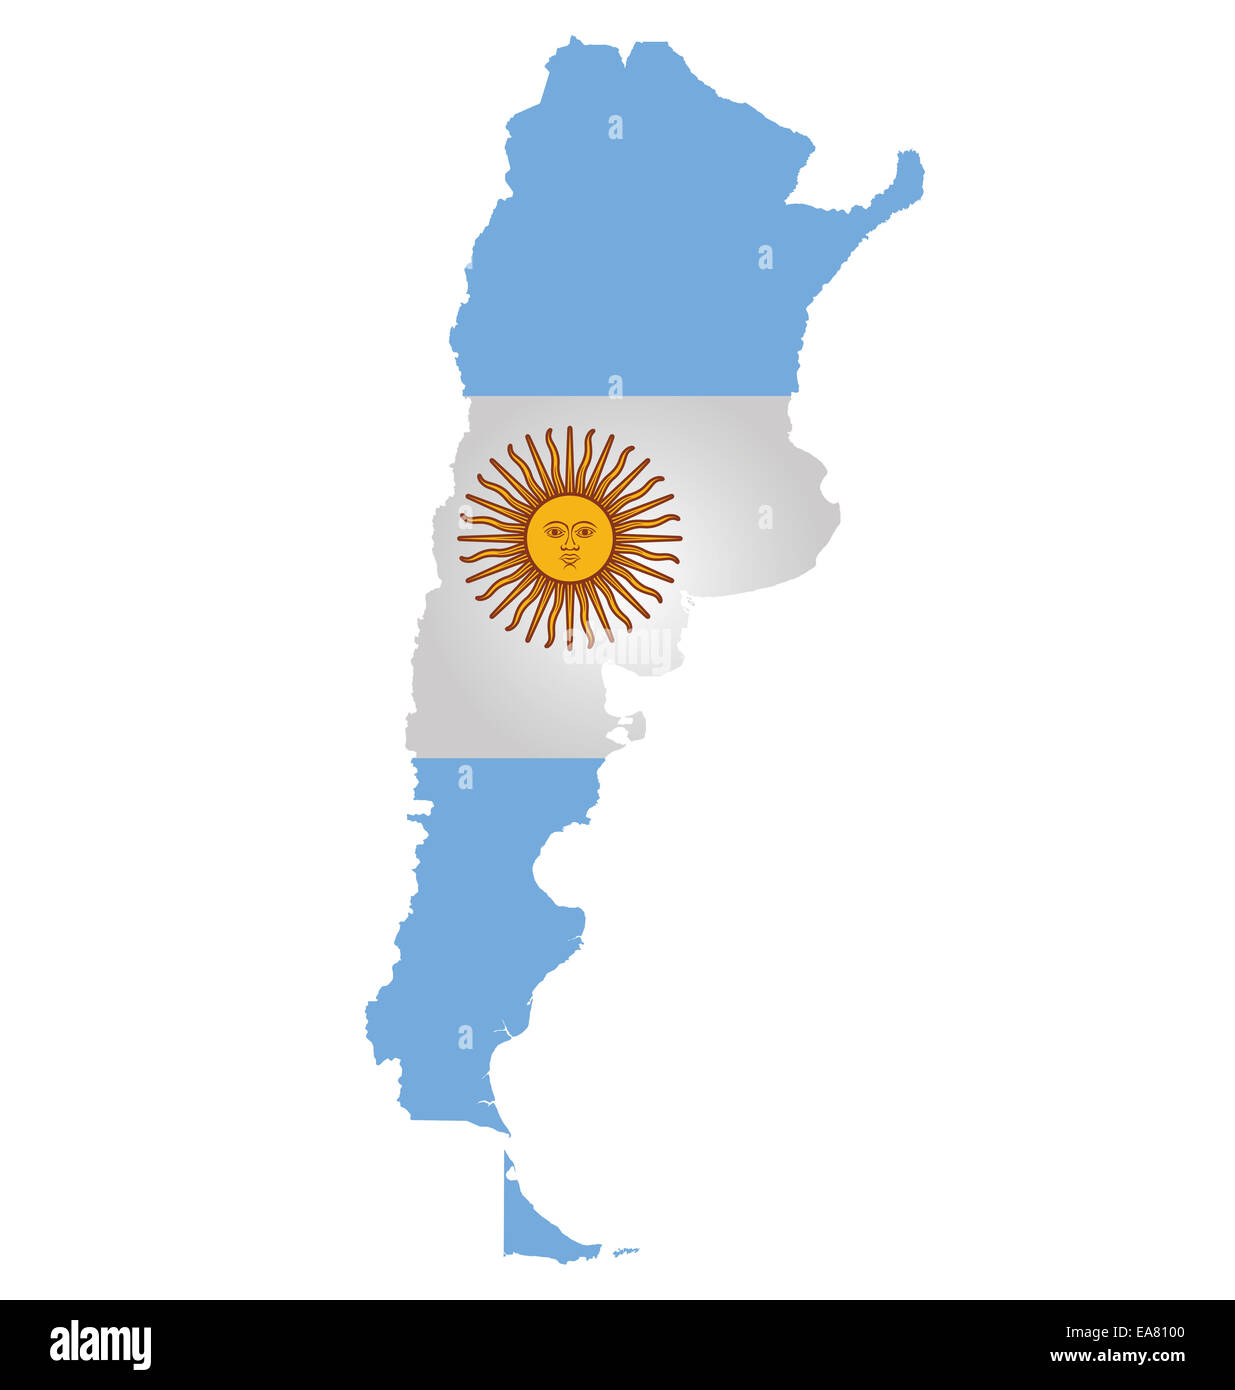 Flag of the Argentine Republic overlaid on detailed outline map isolated on white background Stock Photo